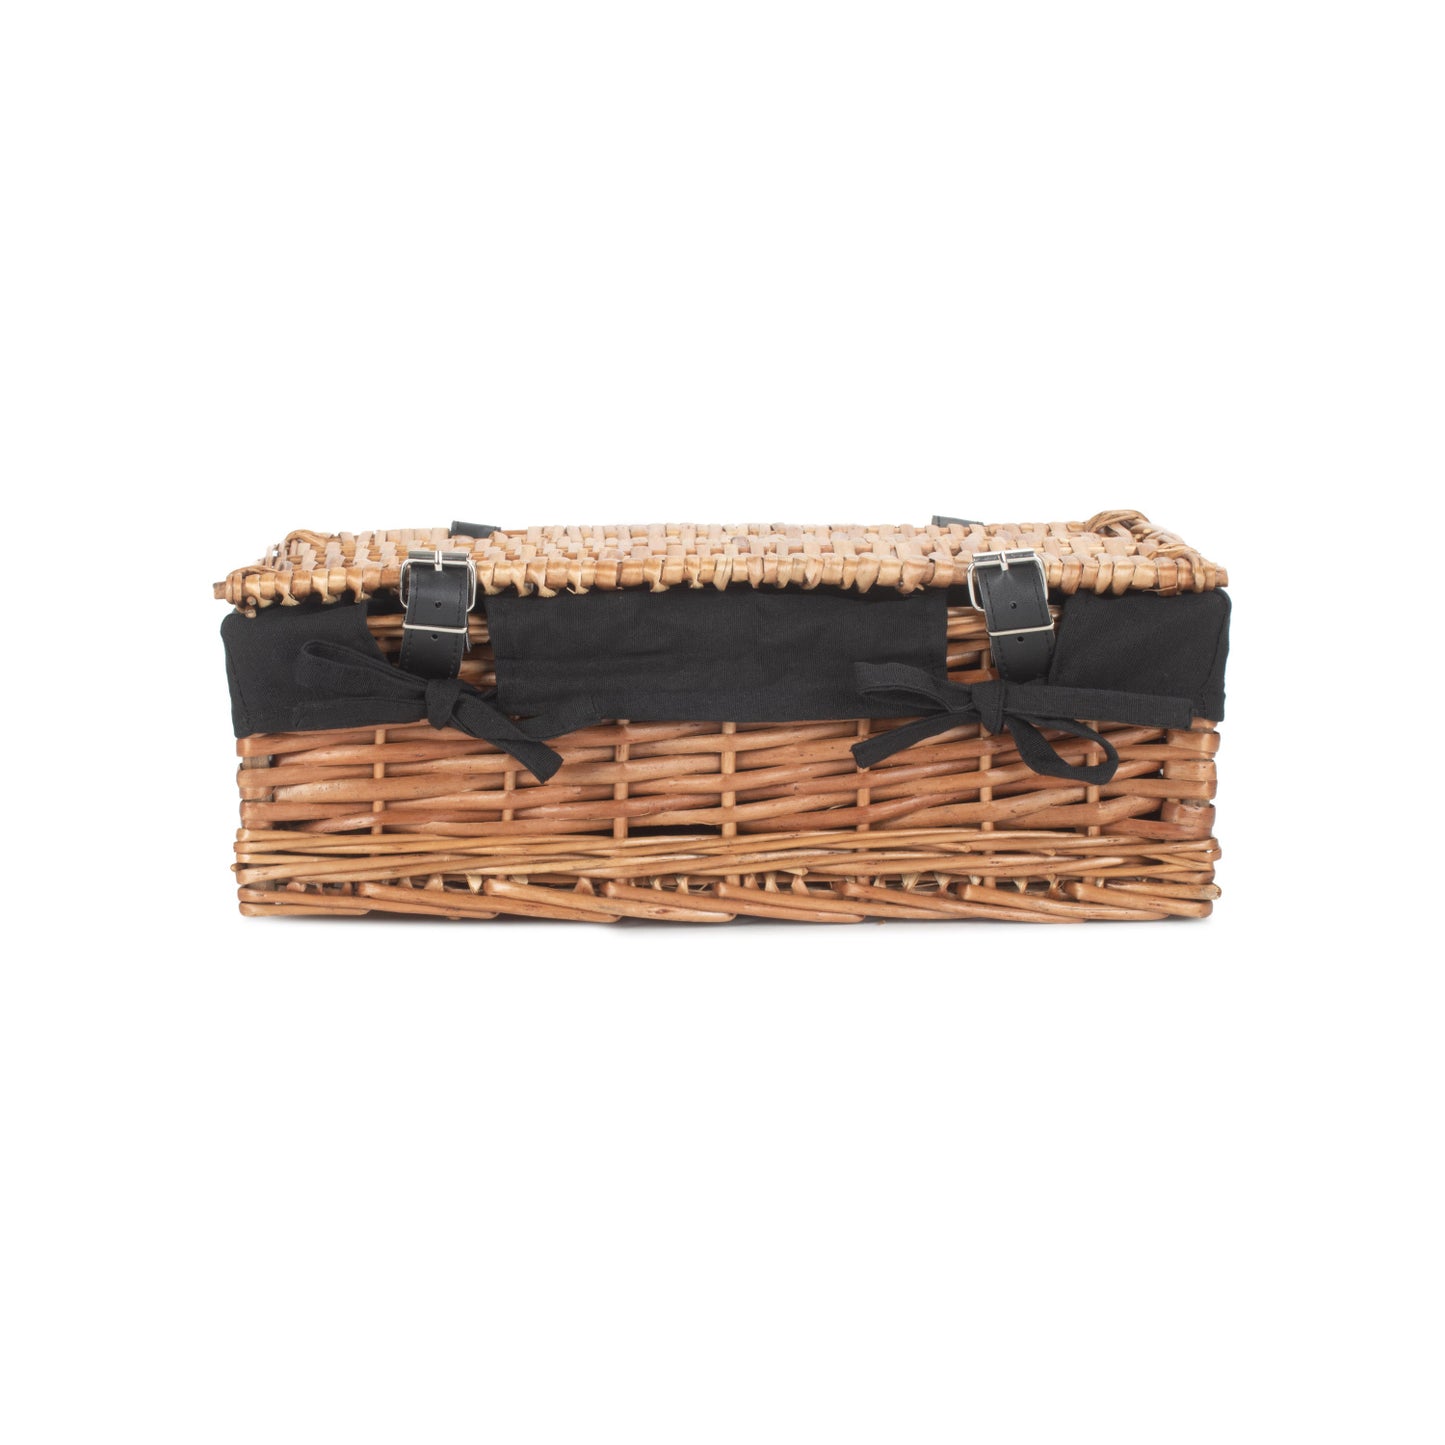 15 Inch Packaging Hamper With Black Lining